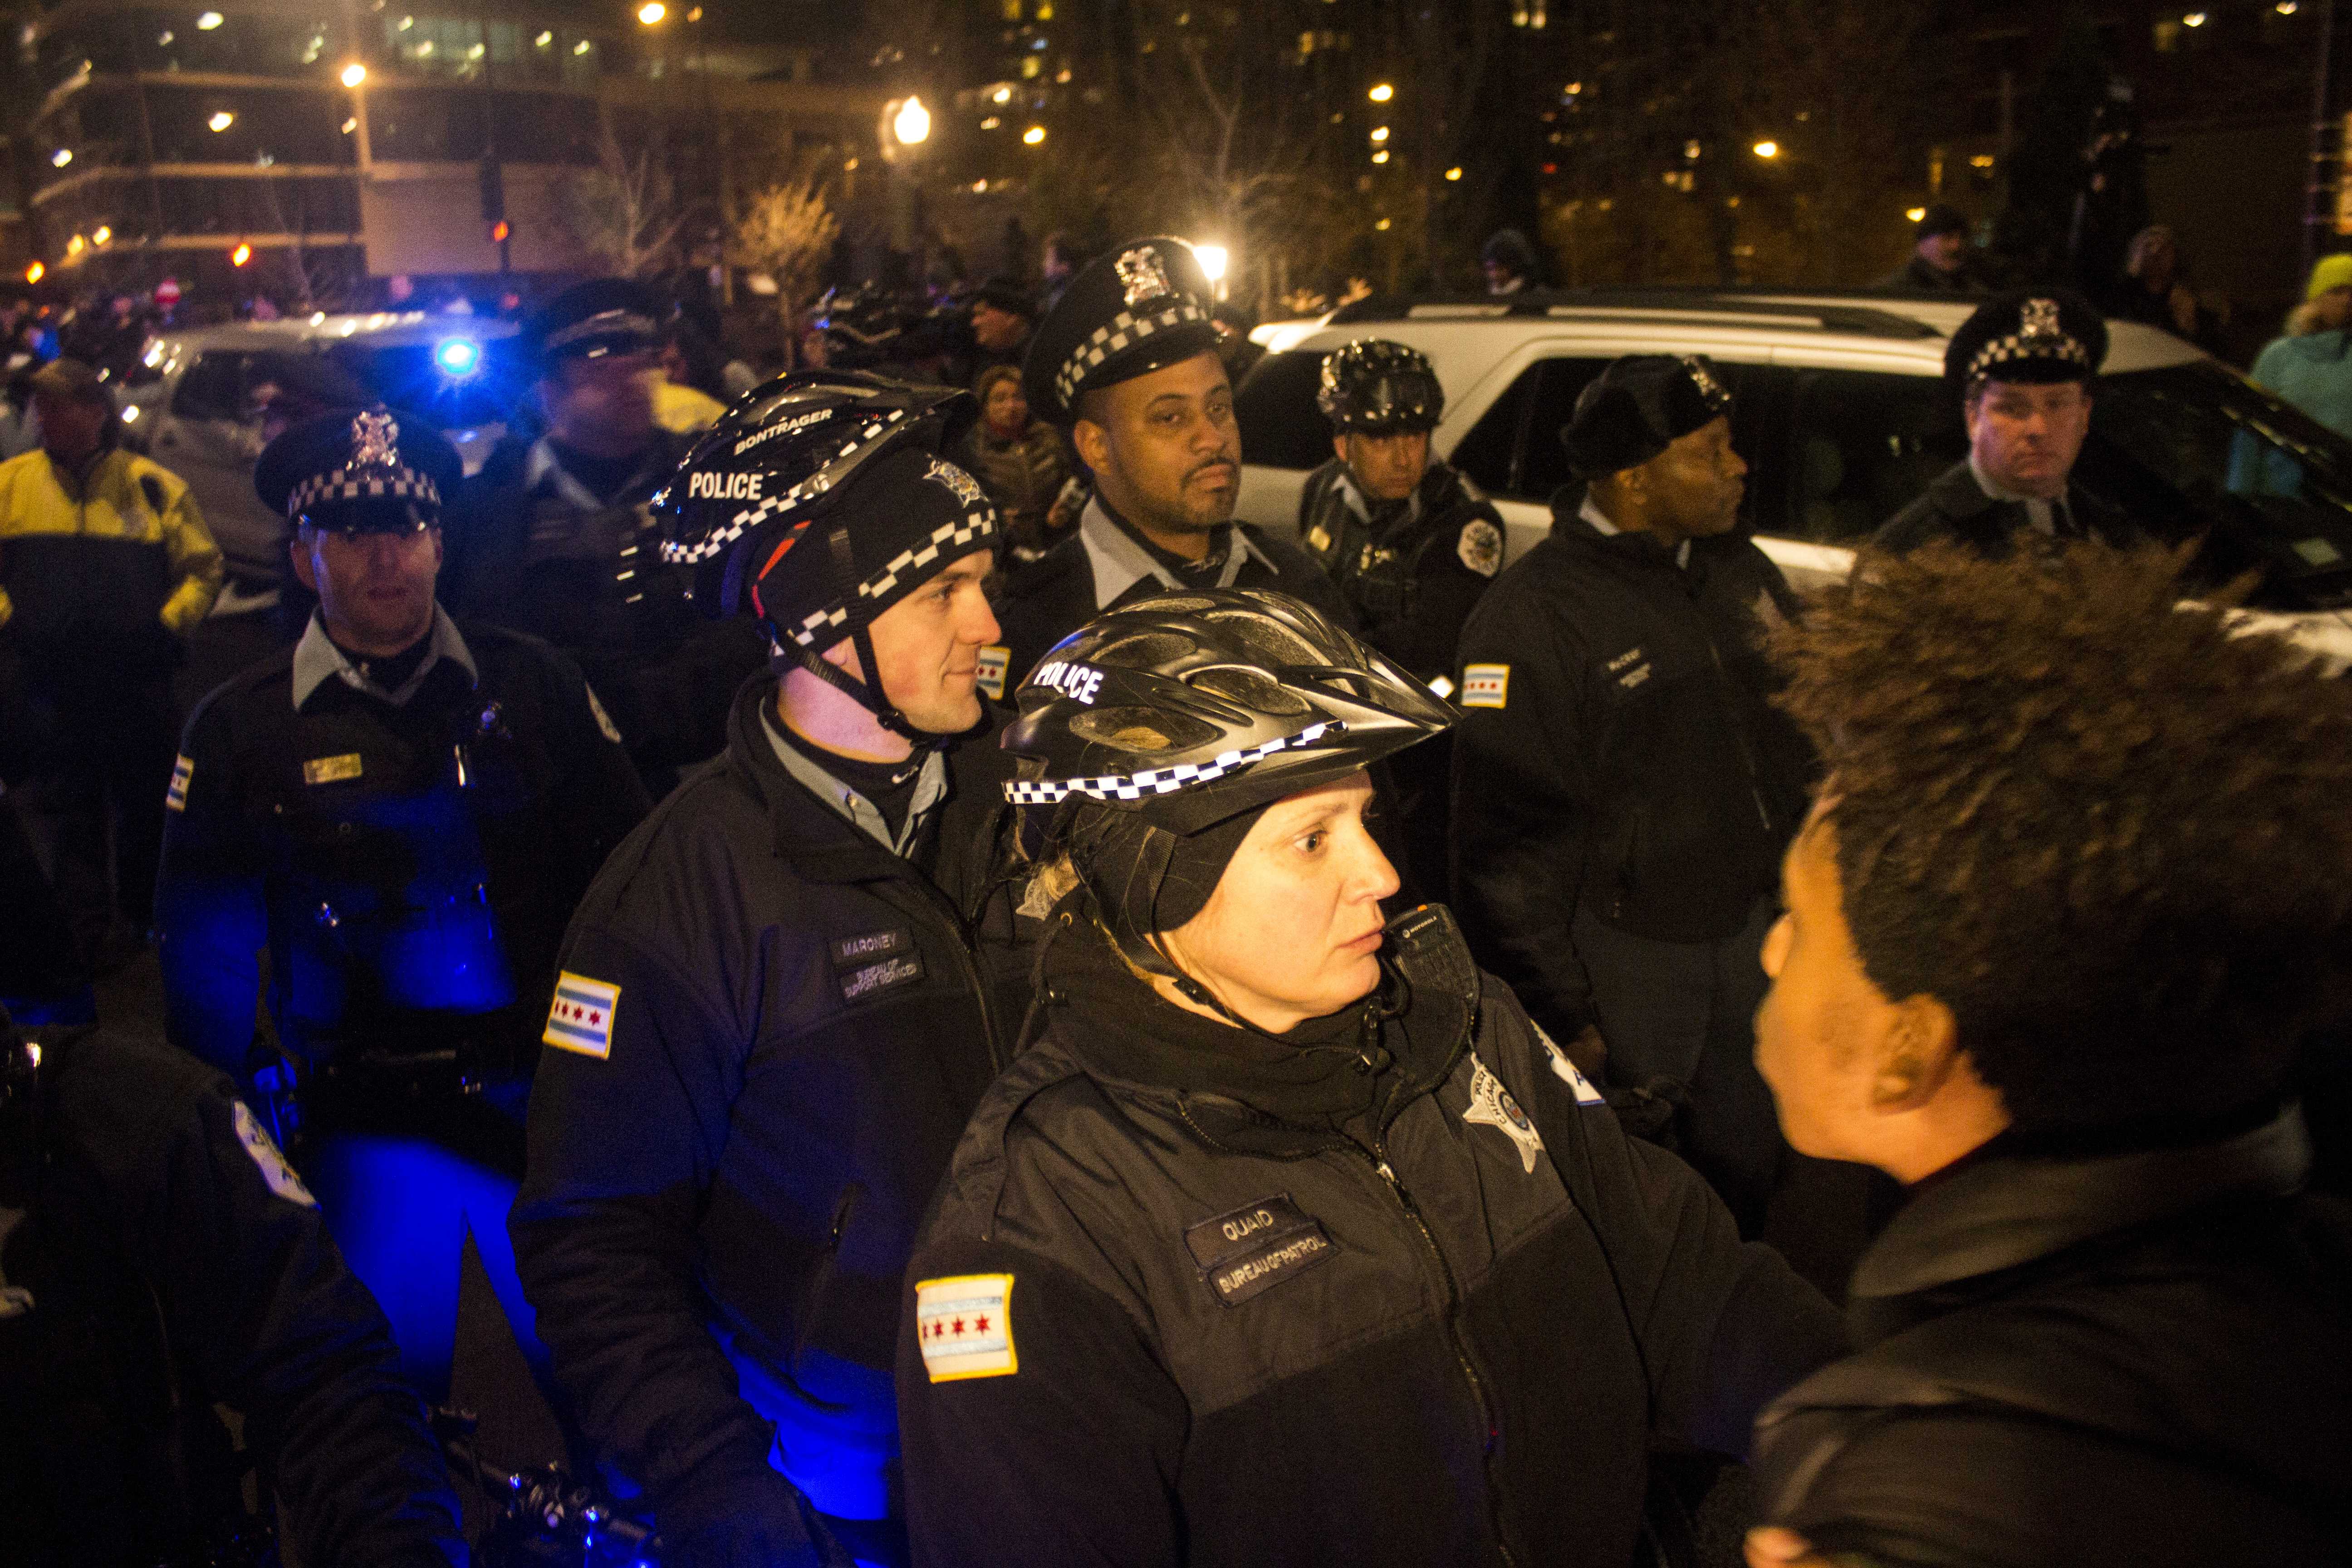 Laquan+McDonald+police+video+spurs+Chicago+protests